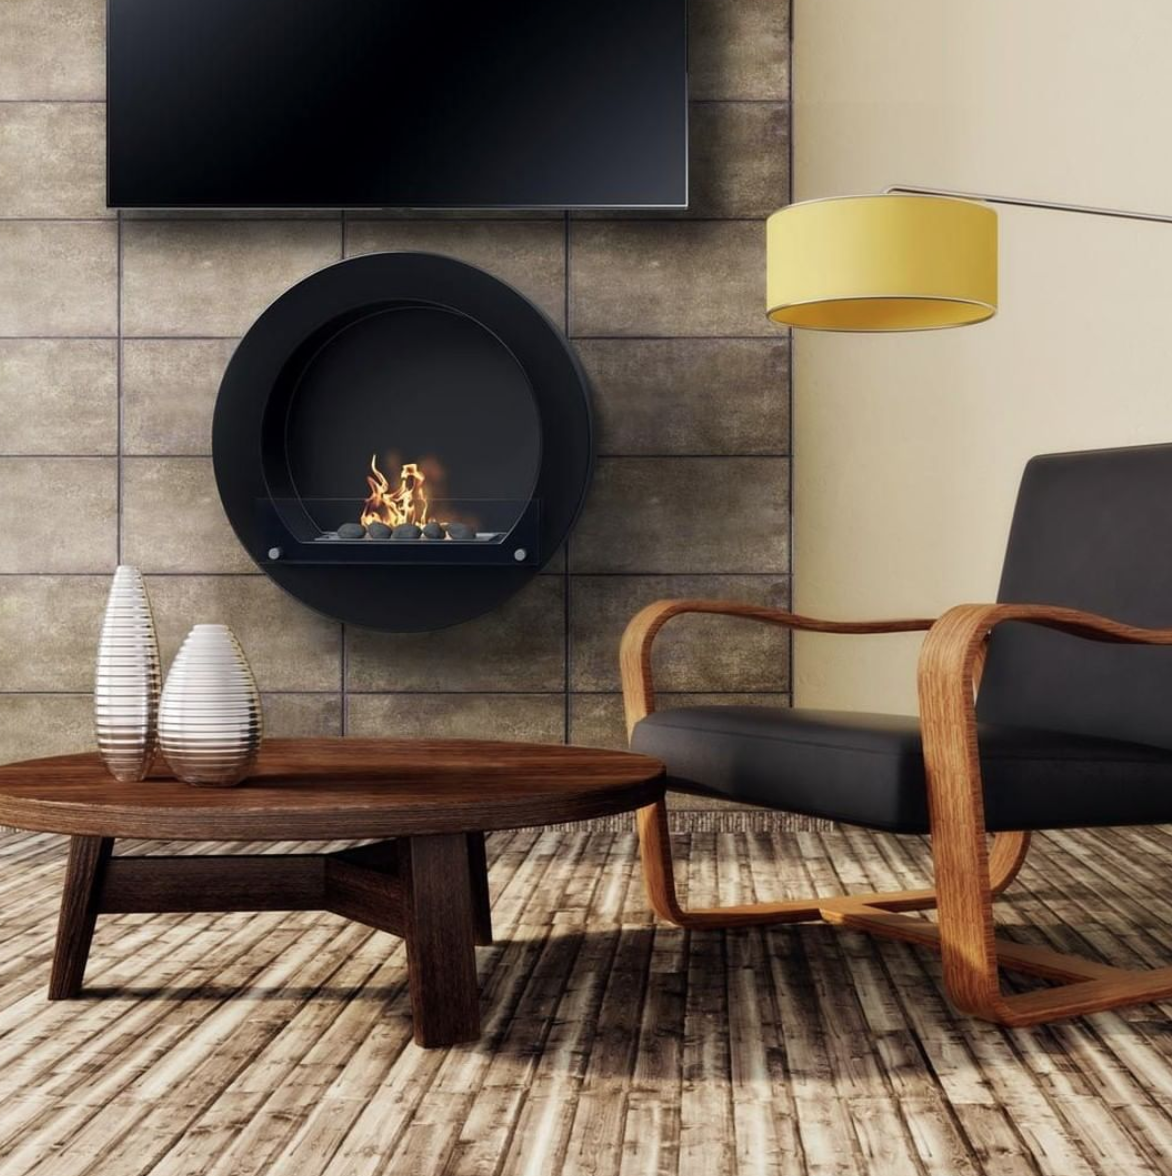 are bioethanol fireplaces warm